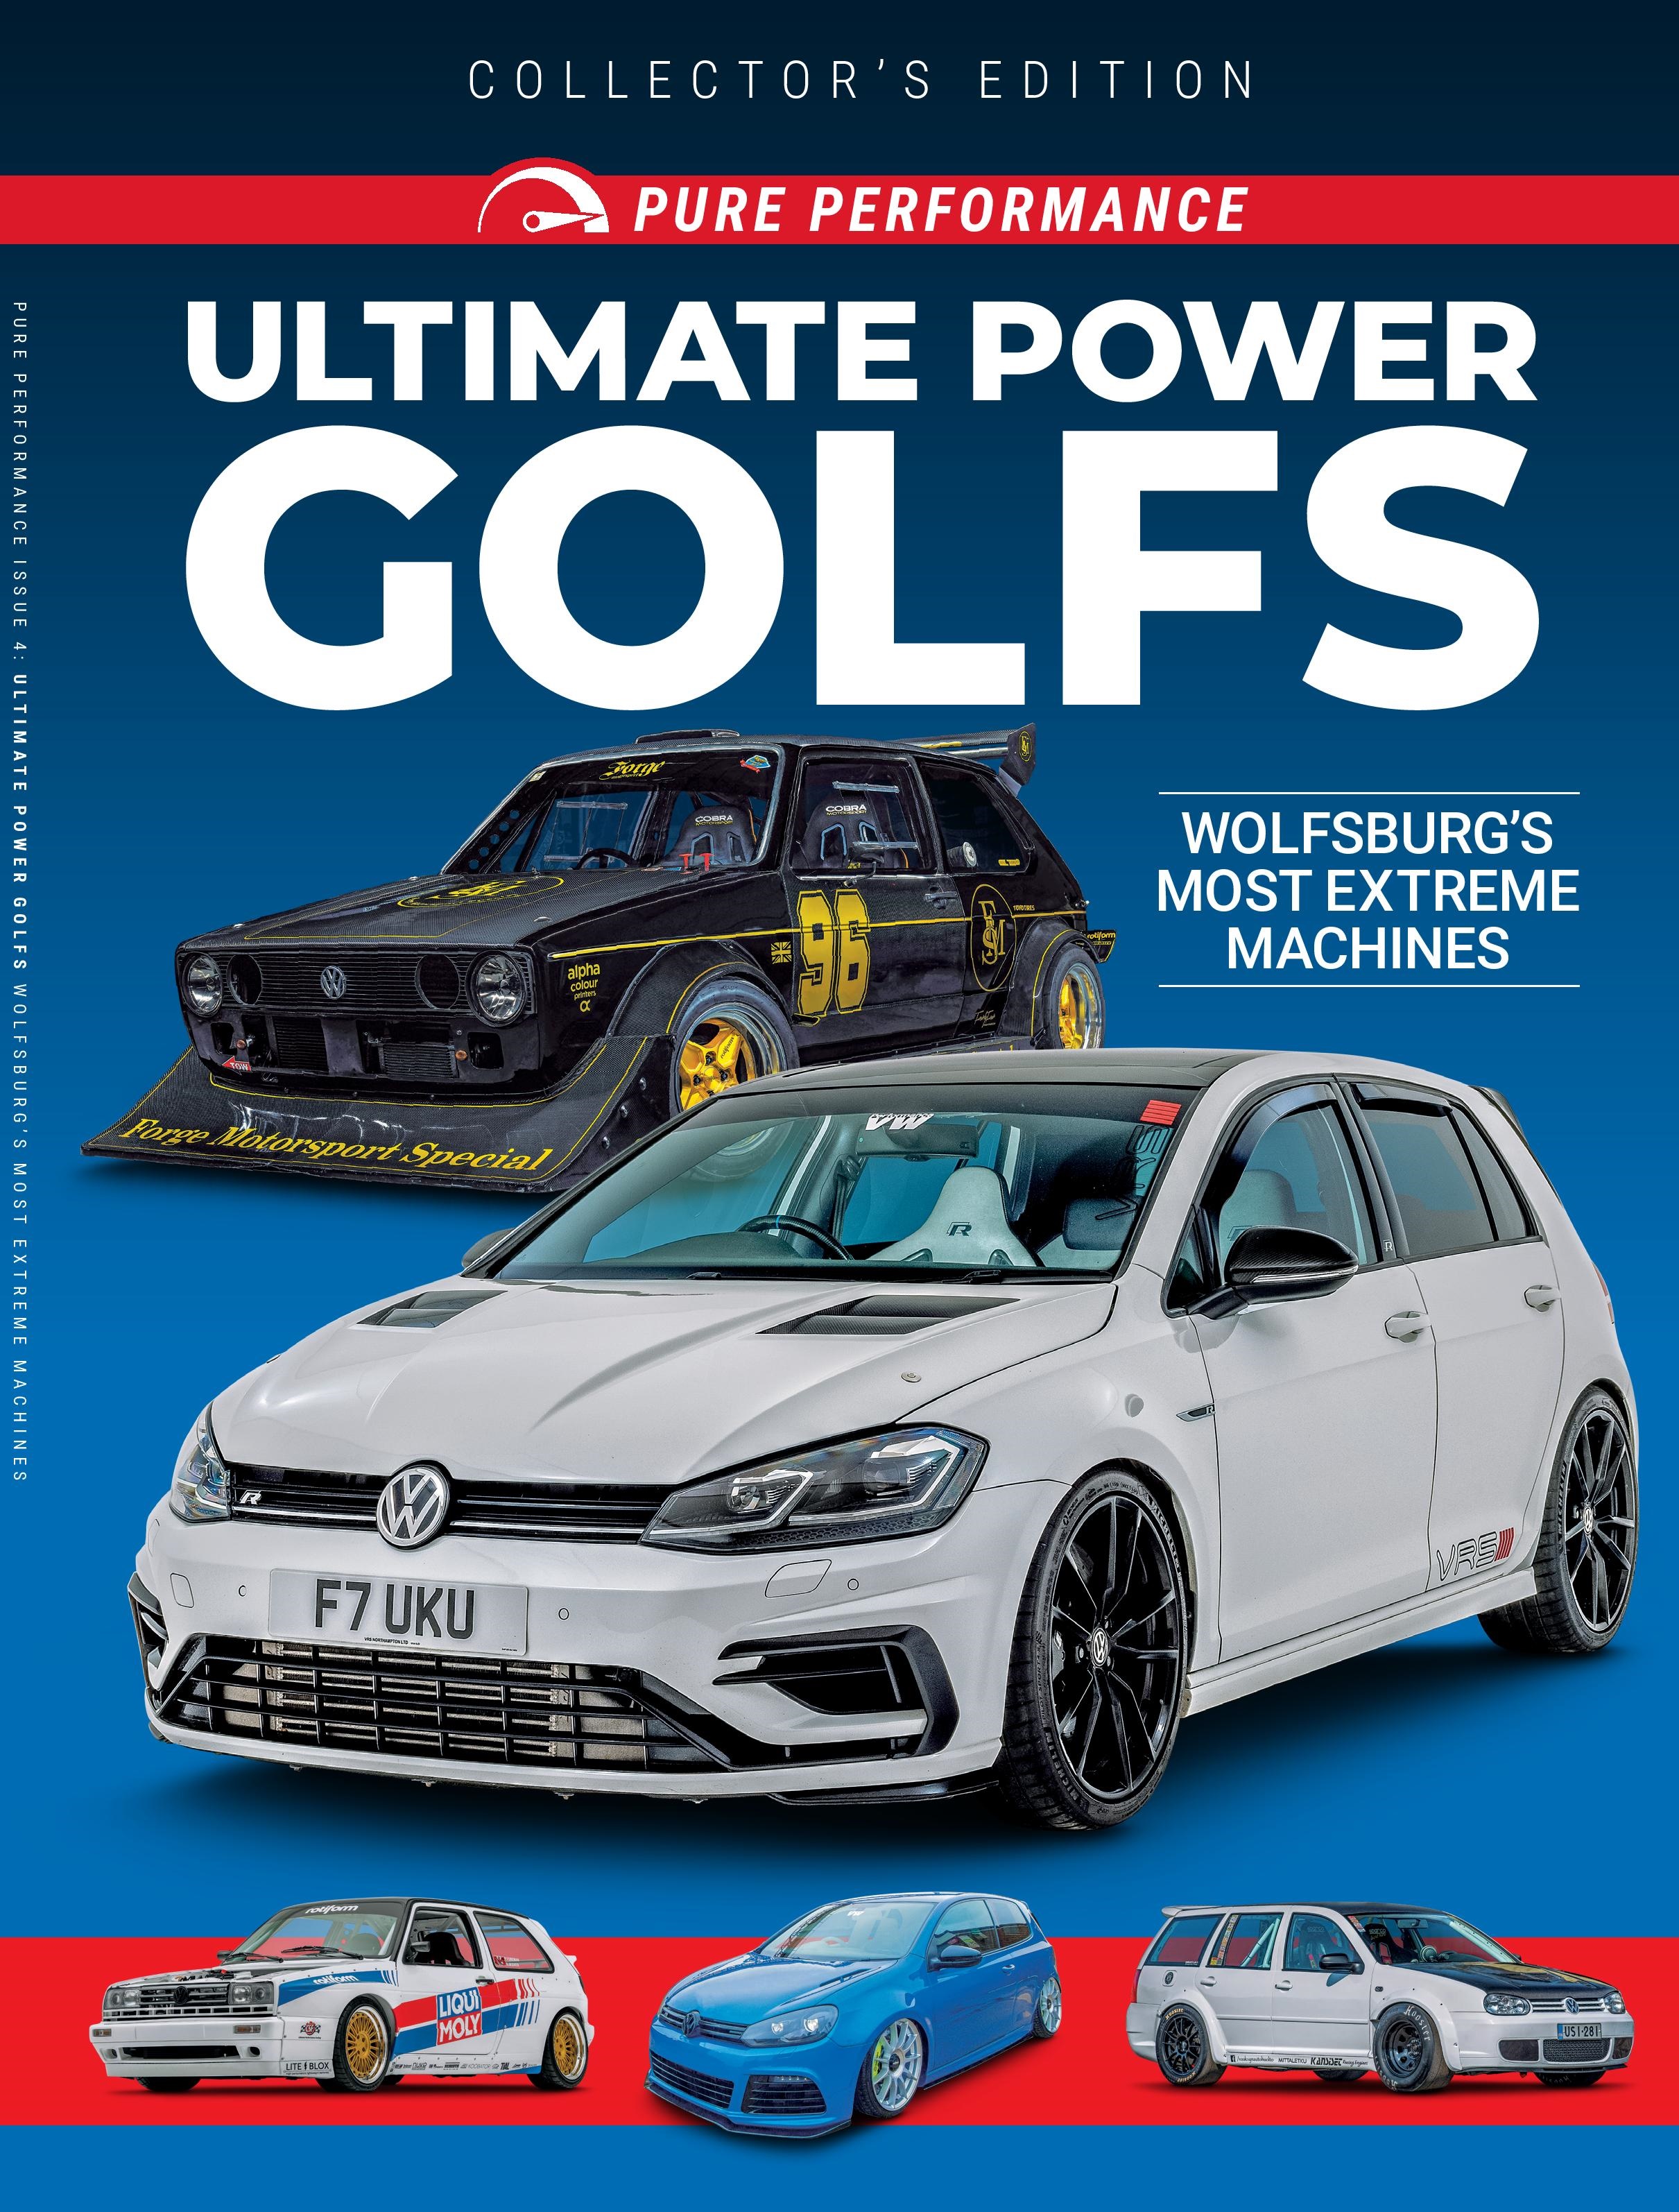 Pure Performance<br>Issue 4 - Ultimate Power Golfs